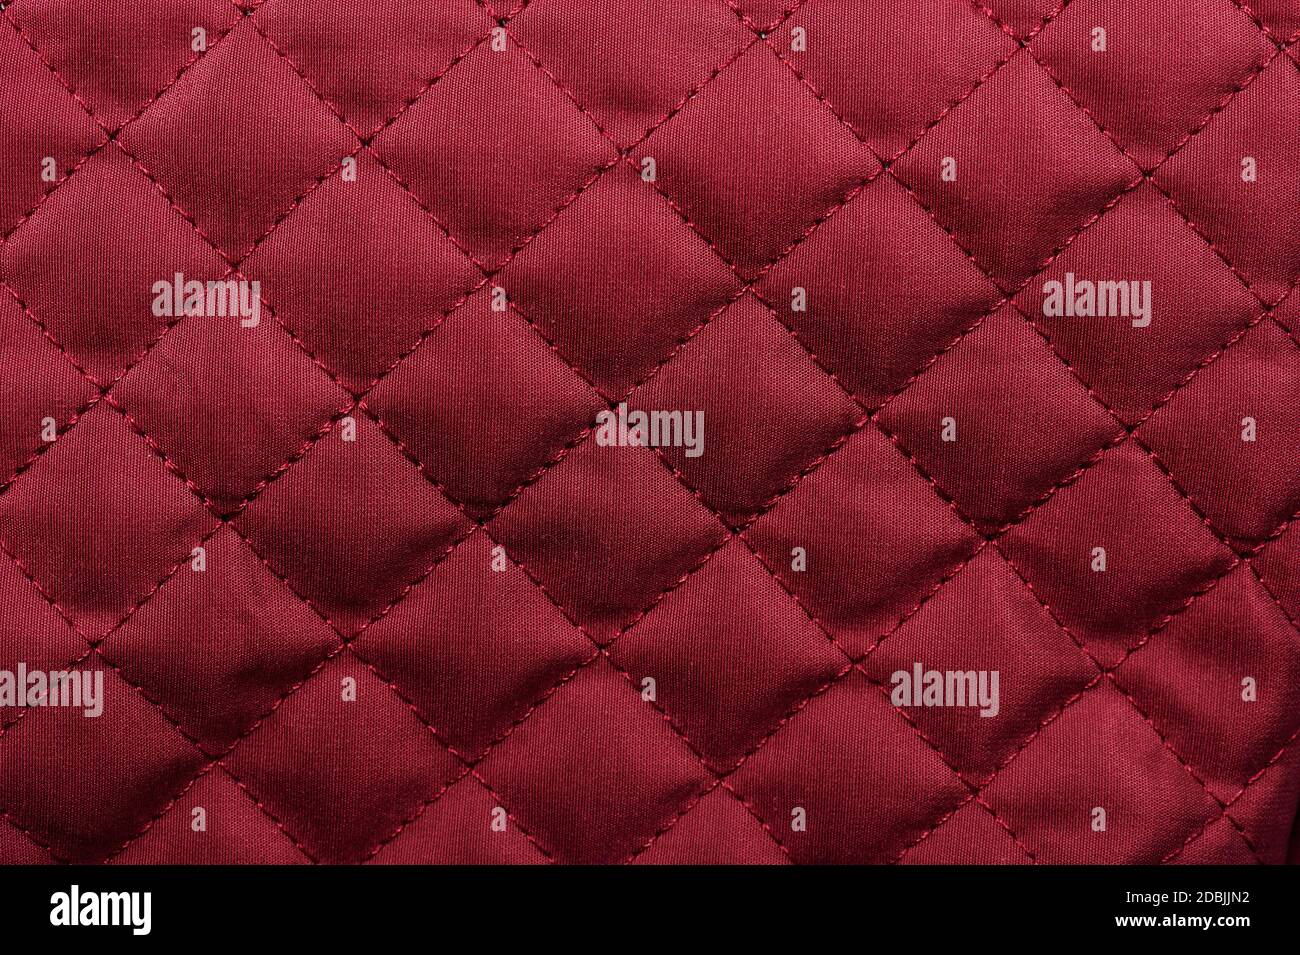 Red luxury tufted fabric texture background with stitches Stock Photo